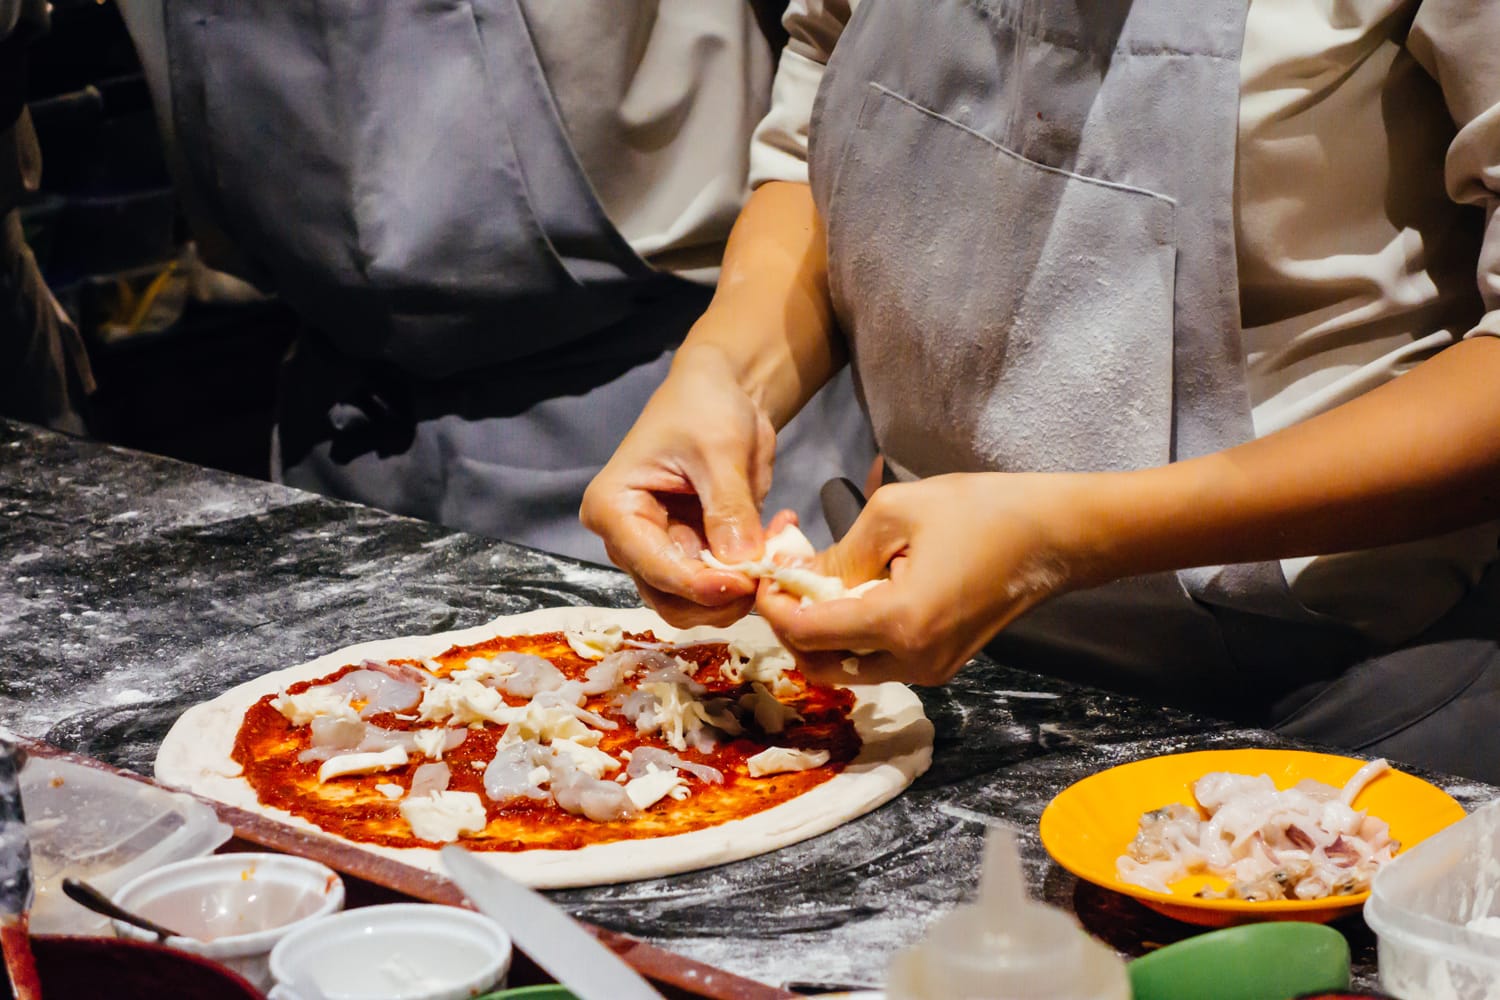 Pizza making at cooking class in Italy